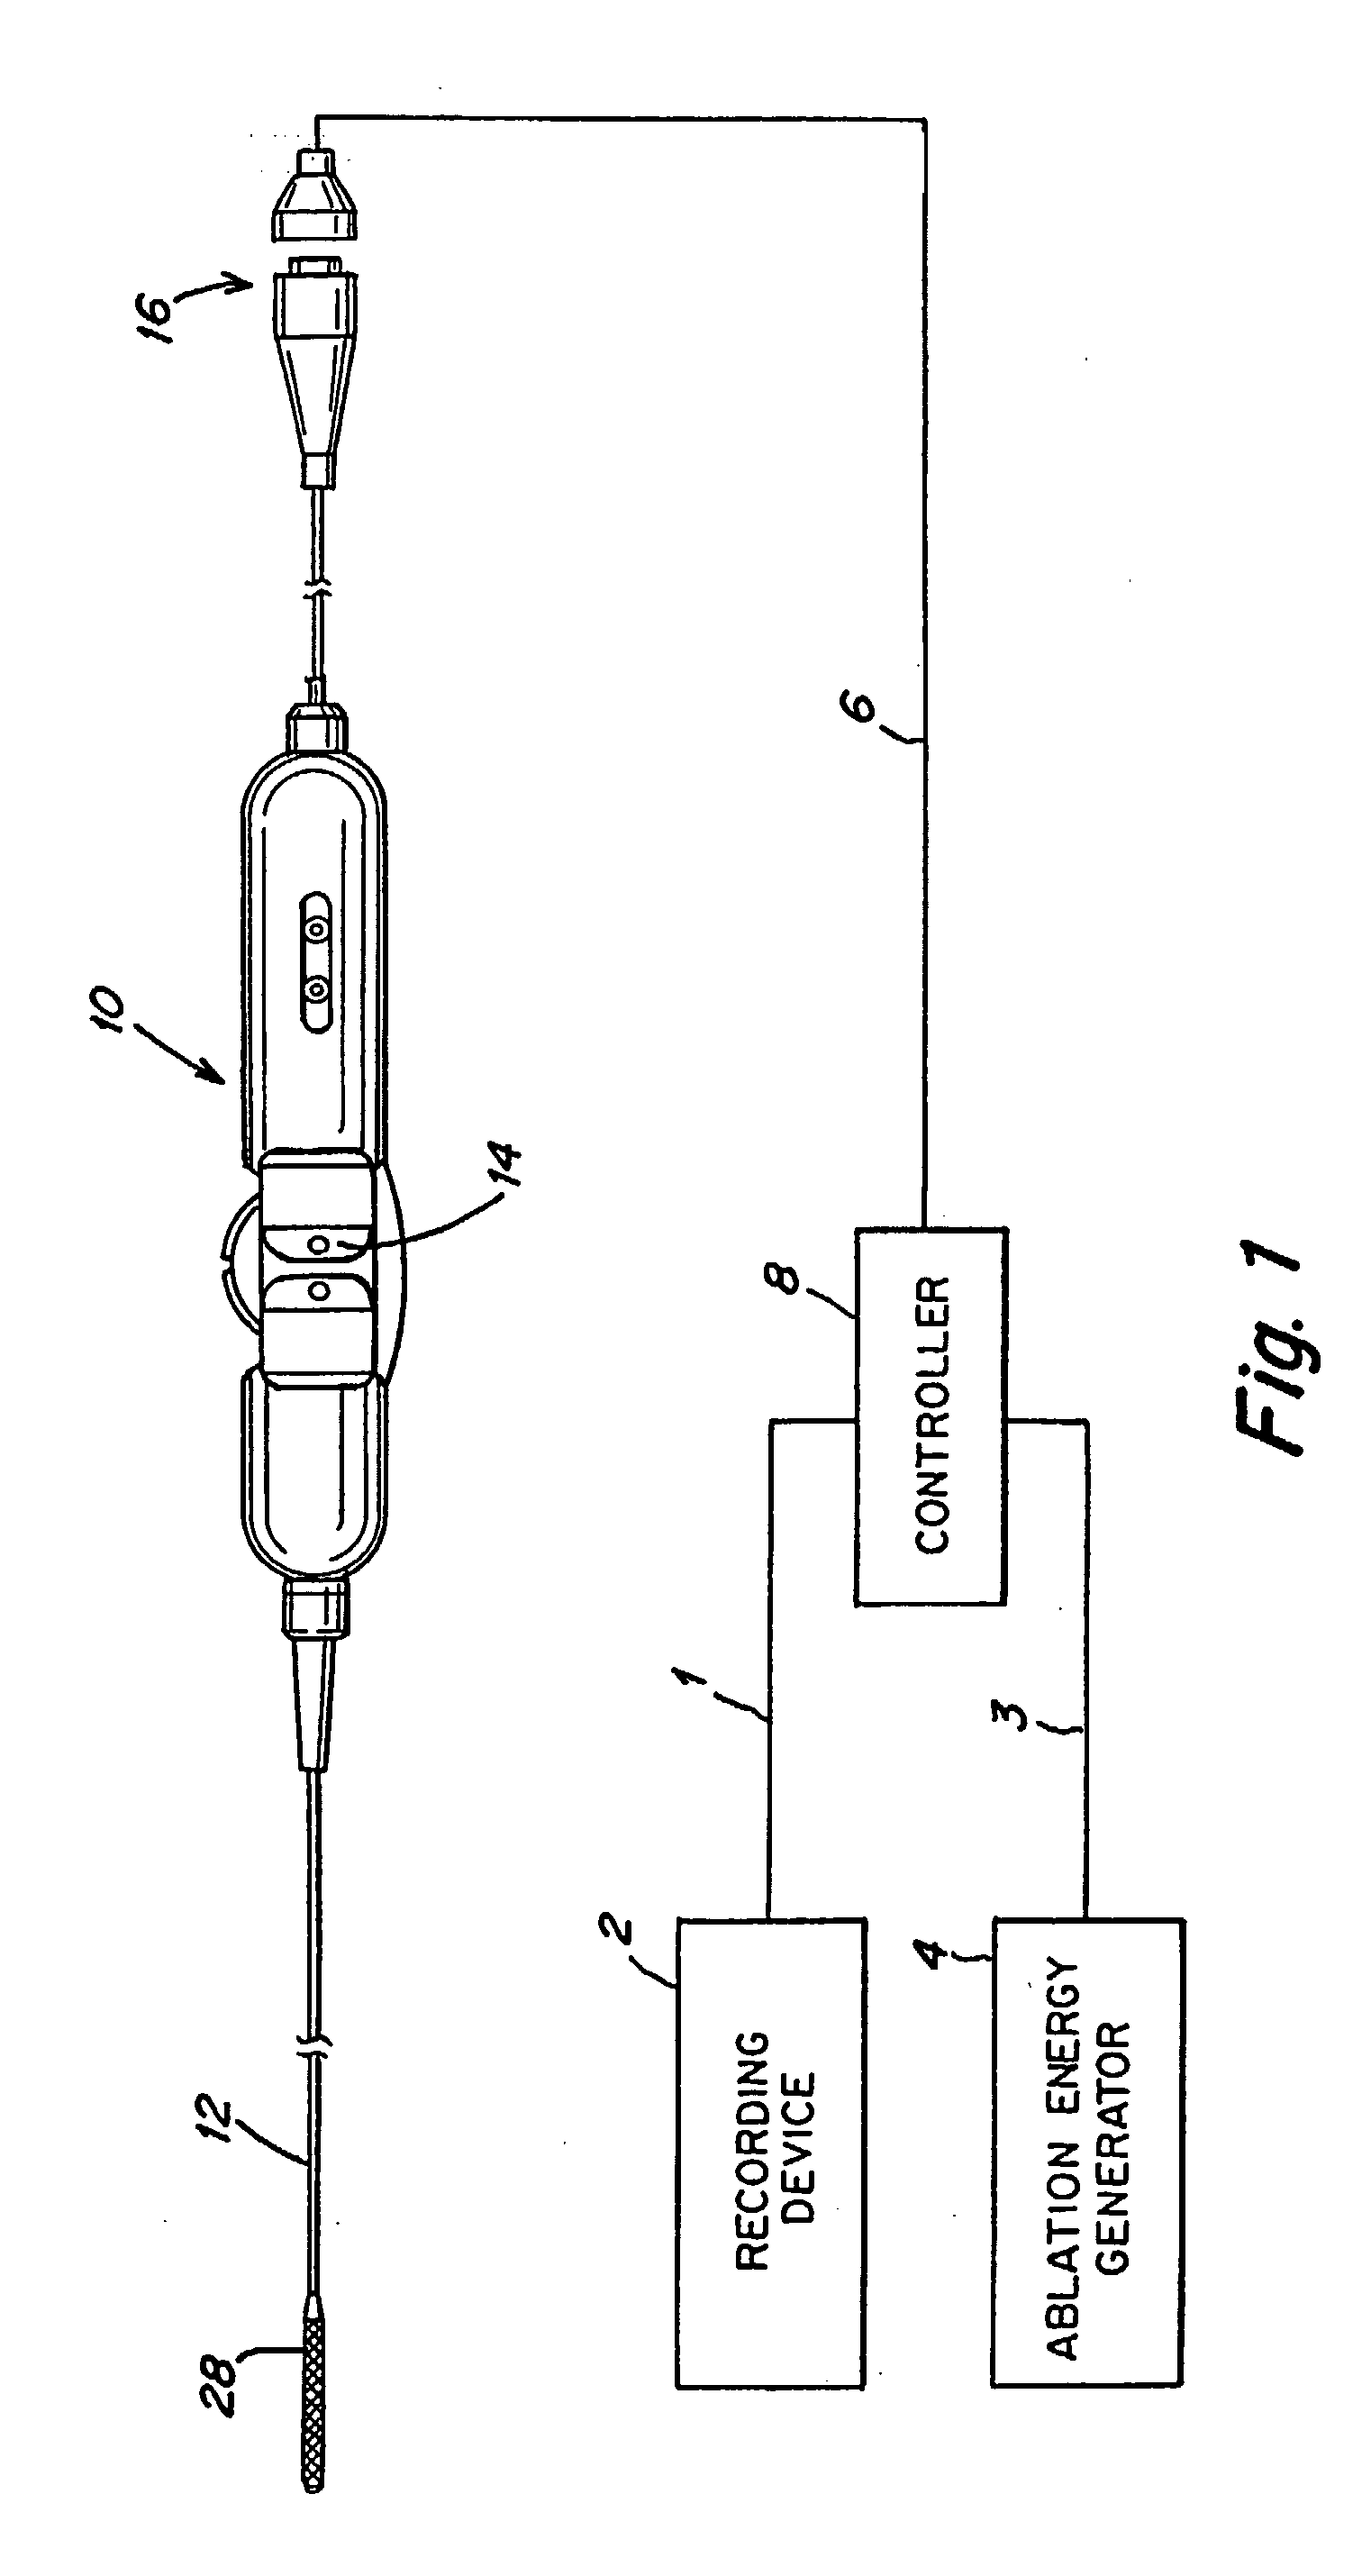 Method and Apparatus for Mapping and/or Ablation of Cardiac Tissue